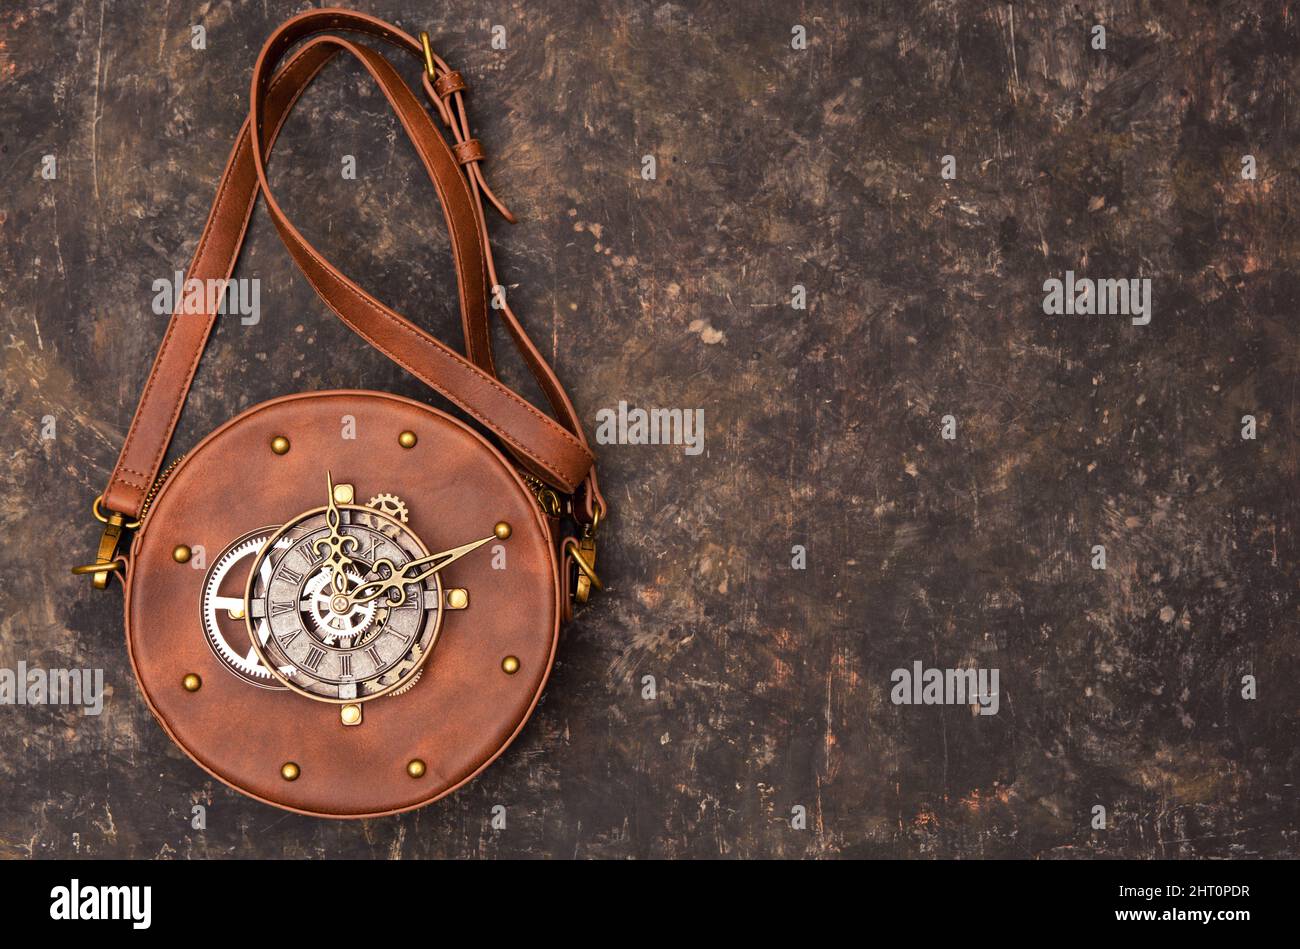 Circle steampunk leather bag with a clockwork on the outside on a grungy background. Stock Photo